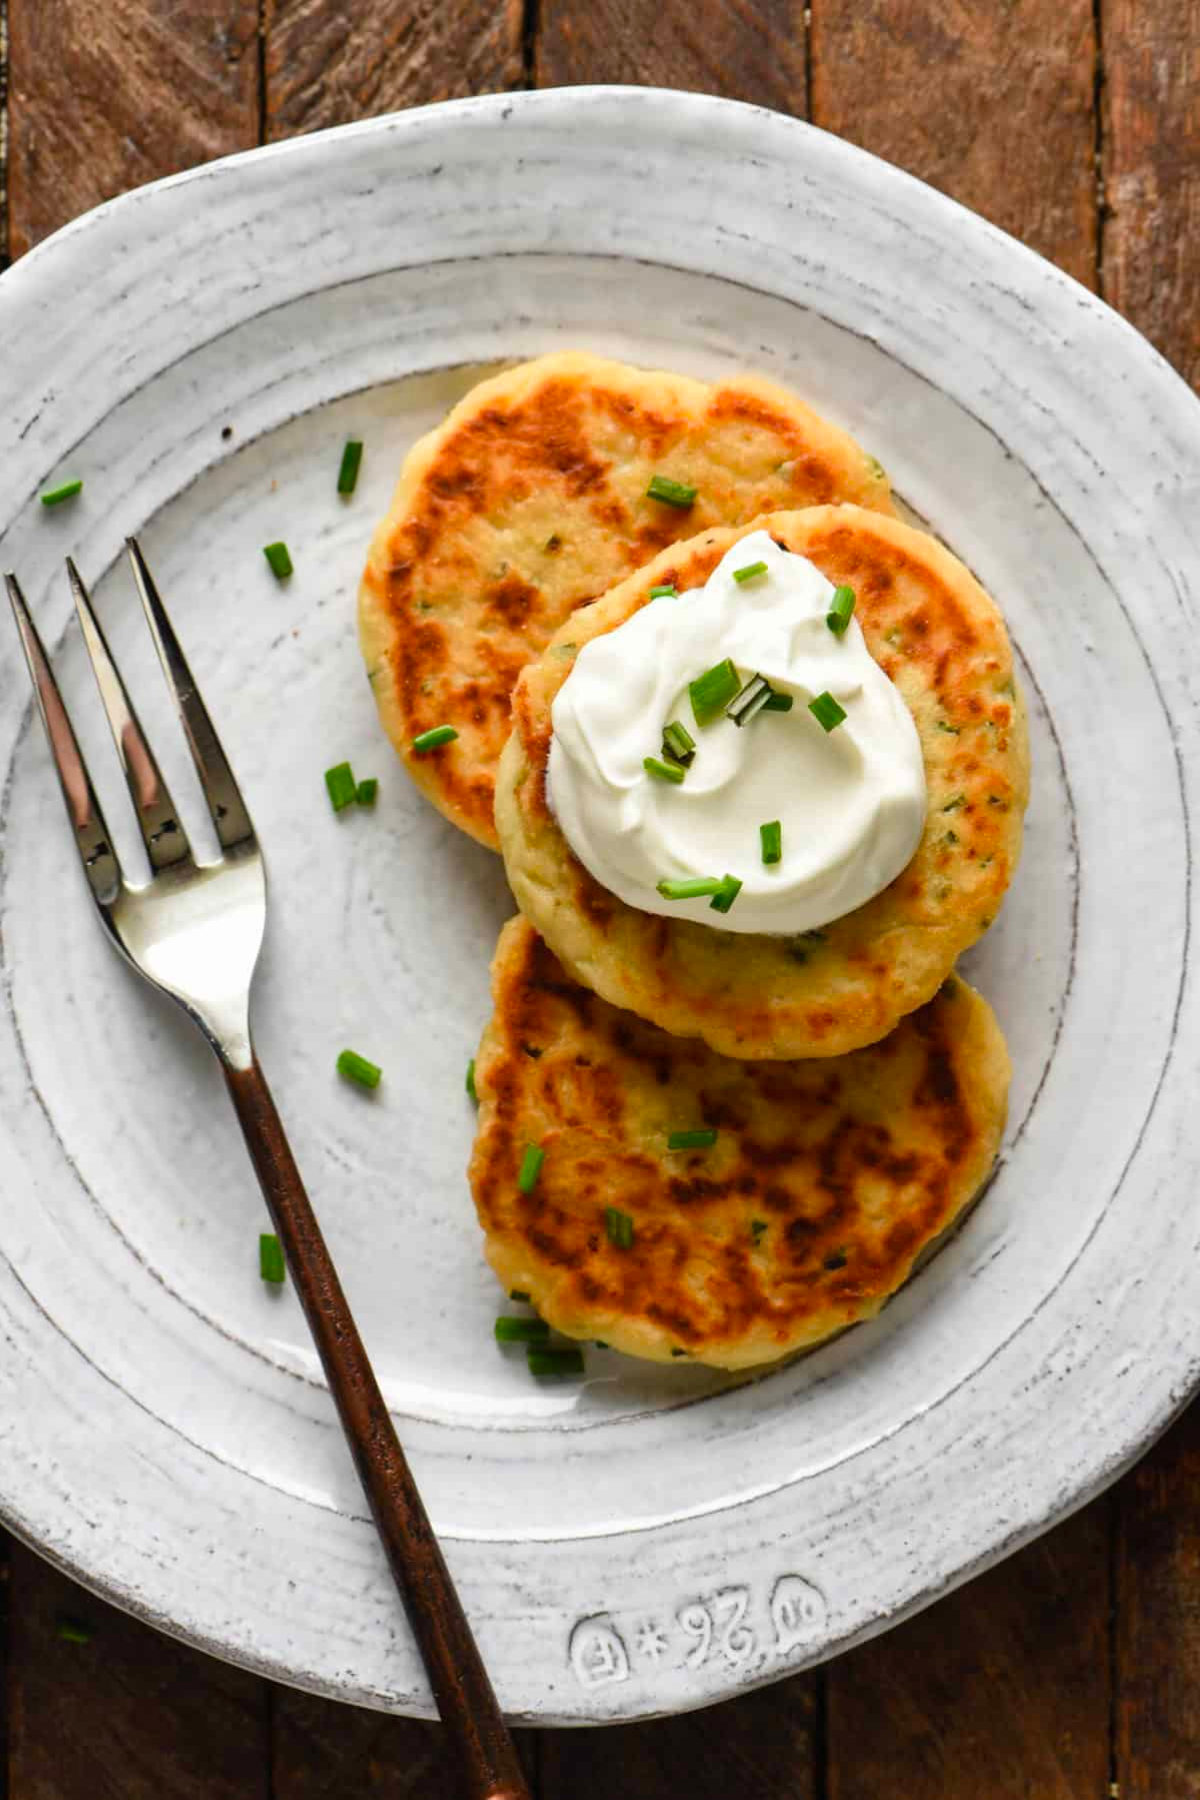 Potato cakes on plate with sour cream and chive topping.